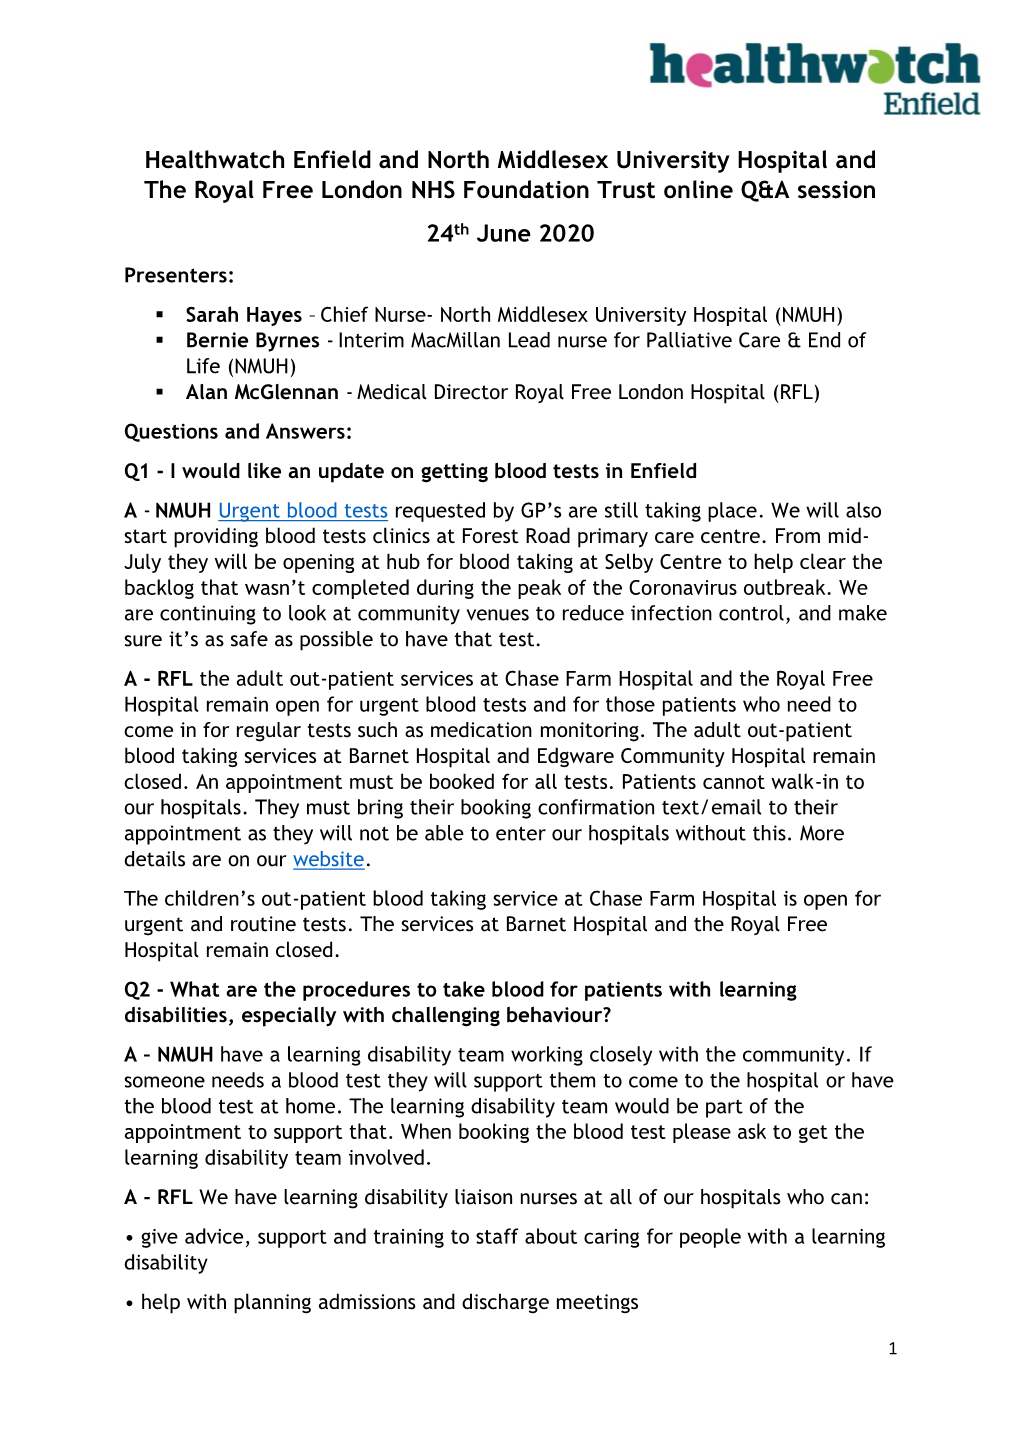 Healthwatch Enfield and North Middlesex University Hospital and the Royal Free London NHS Foundation Trust Online Q&A Session 24Th June 2020 Presenters